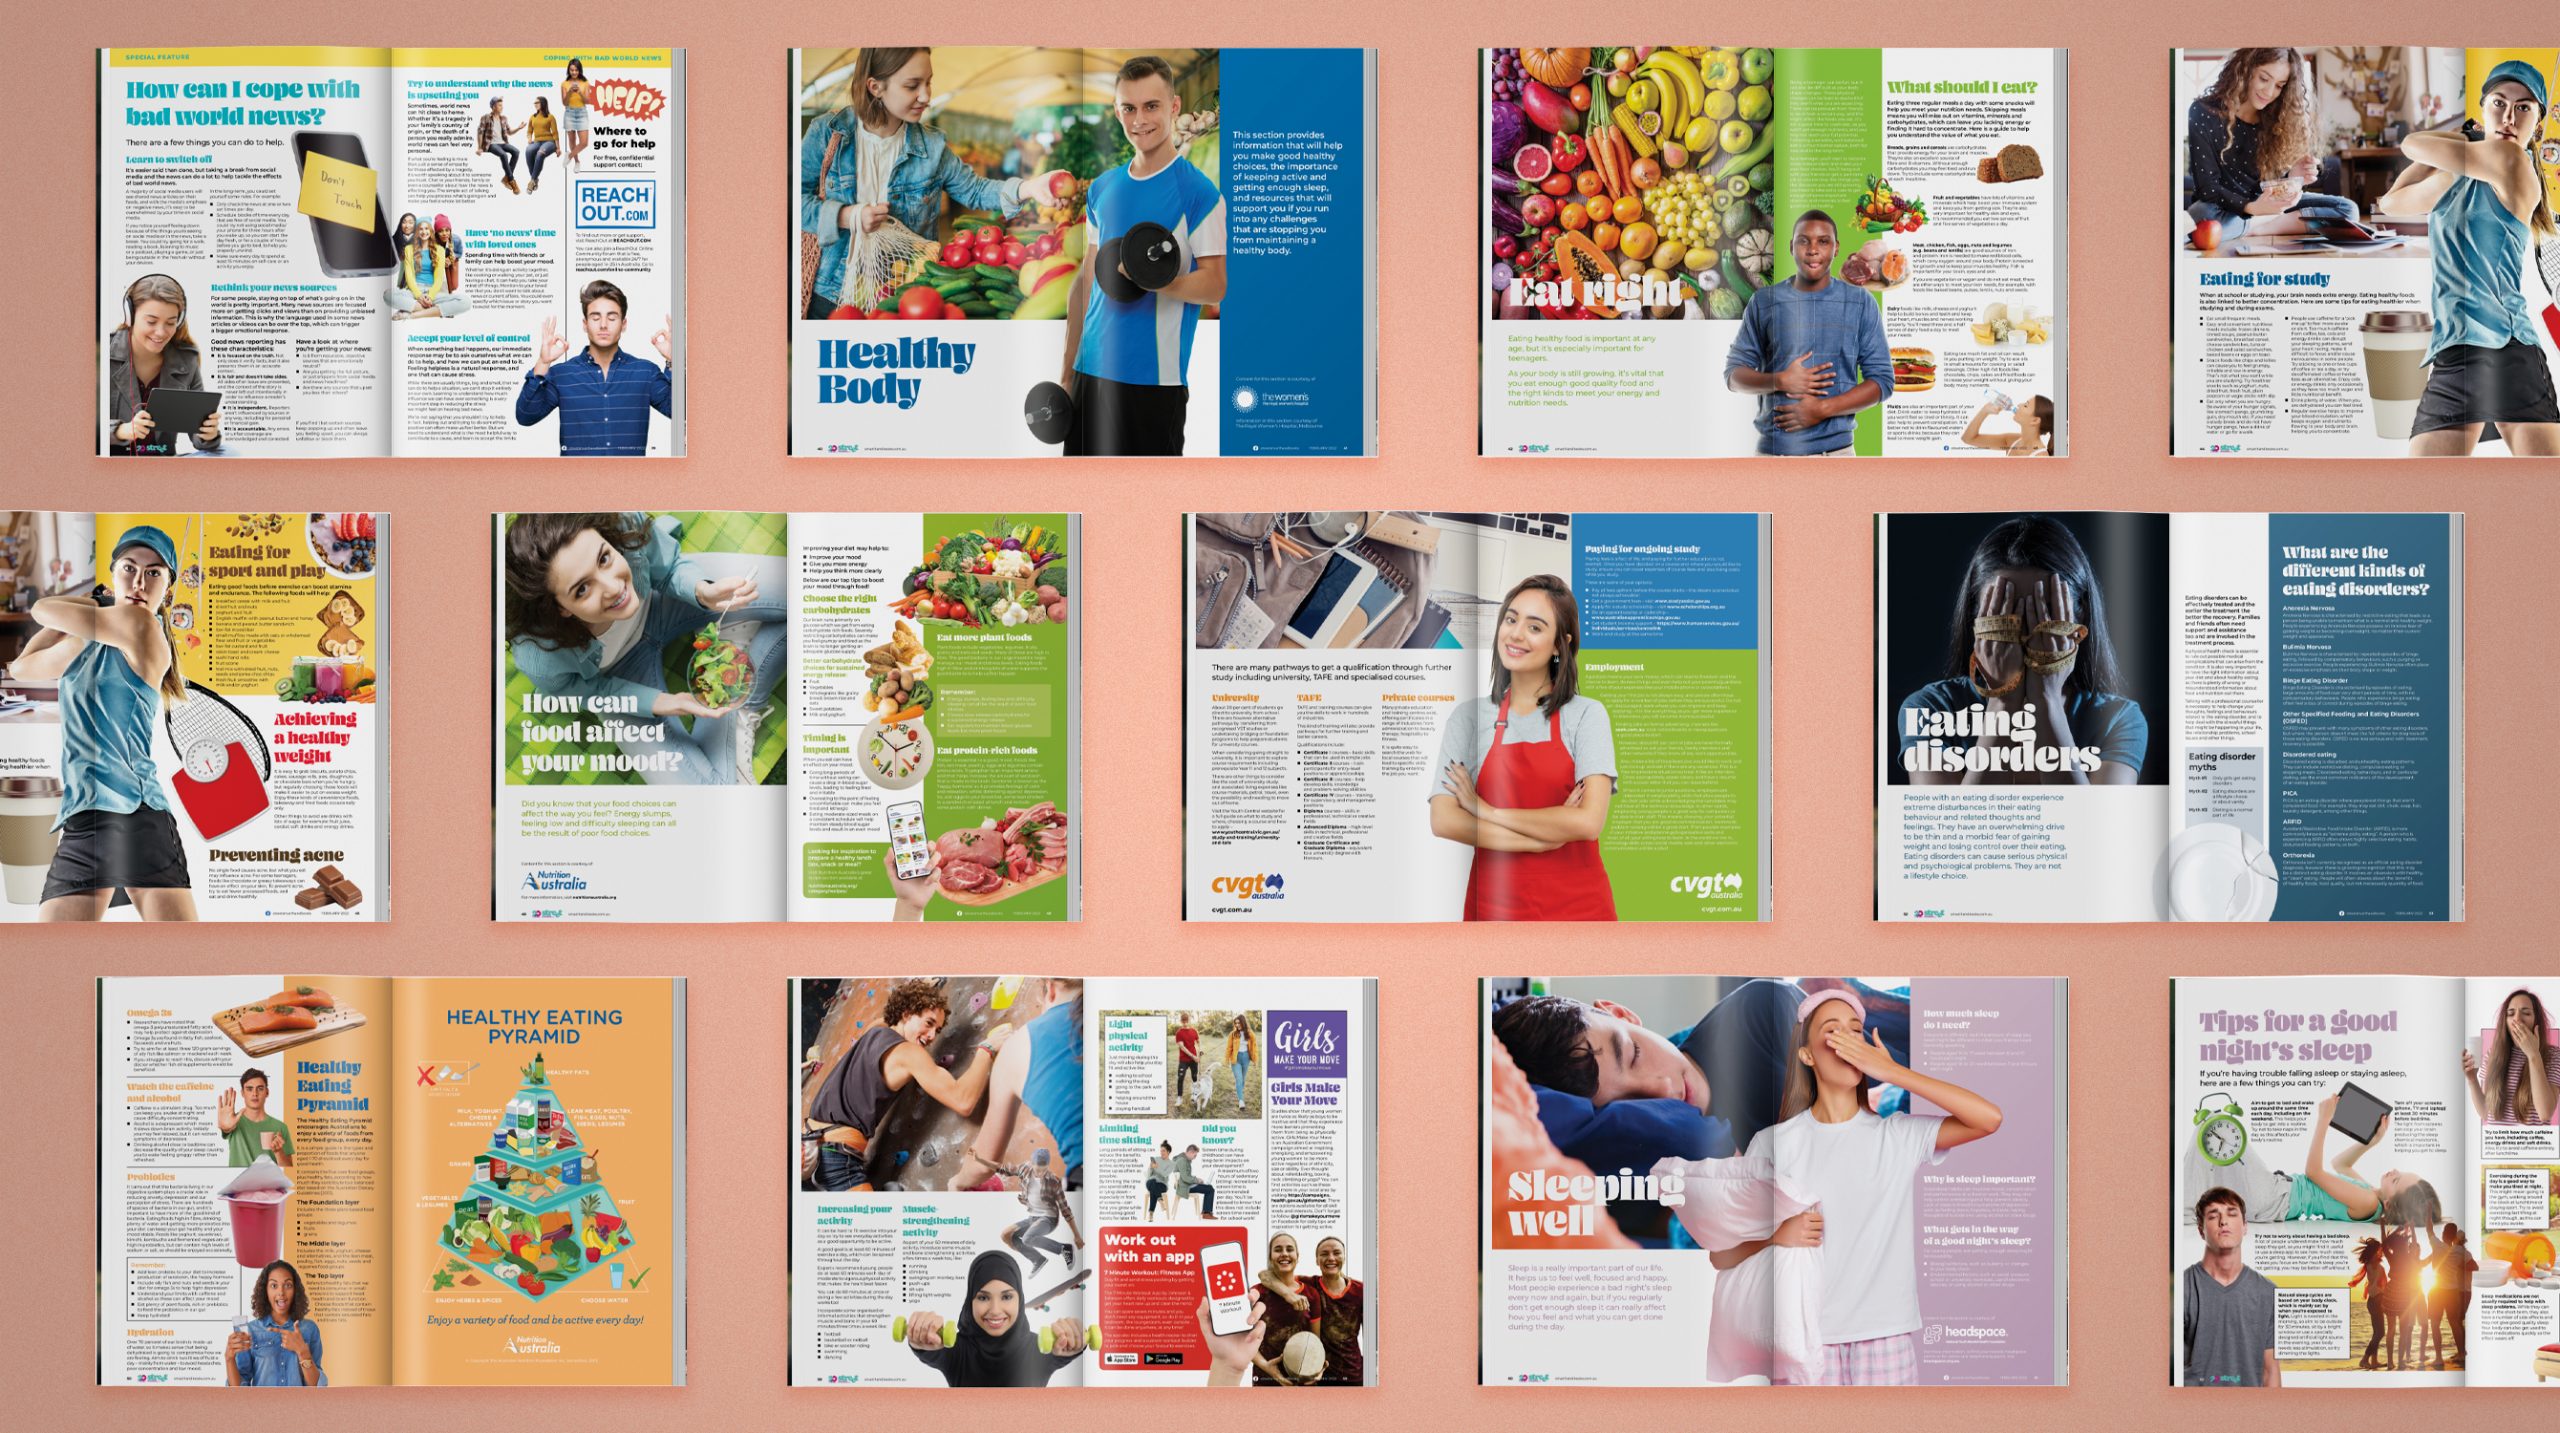 Interior spreads from the Streetsmart Handbook chapters including Healthy Body, Eat Right, Eating Disorders, Healthy Eating, Physical Activity and Sleeping Well.